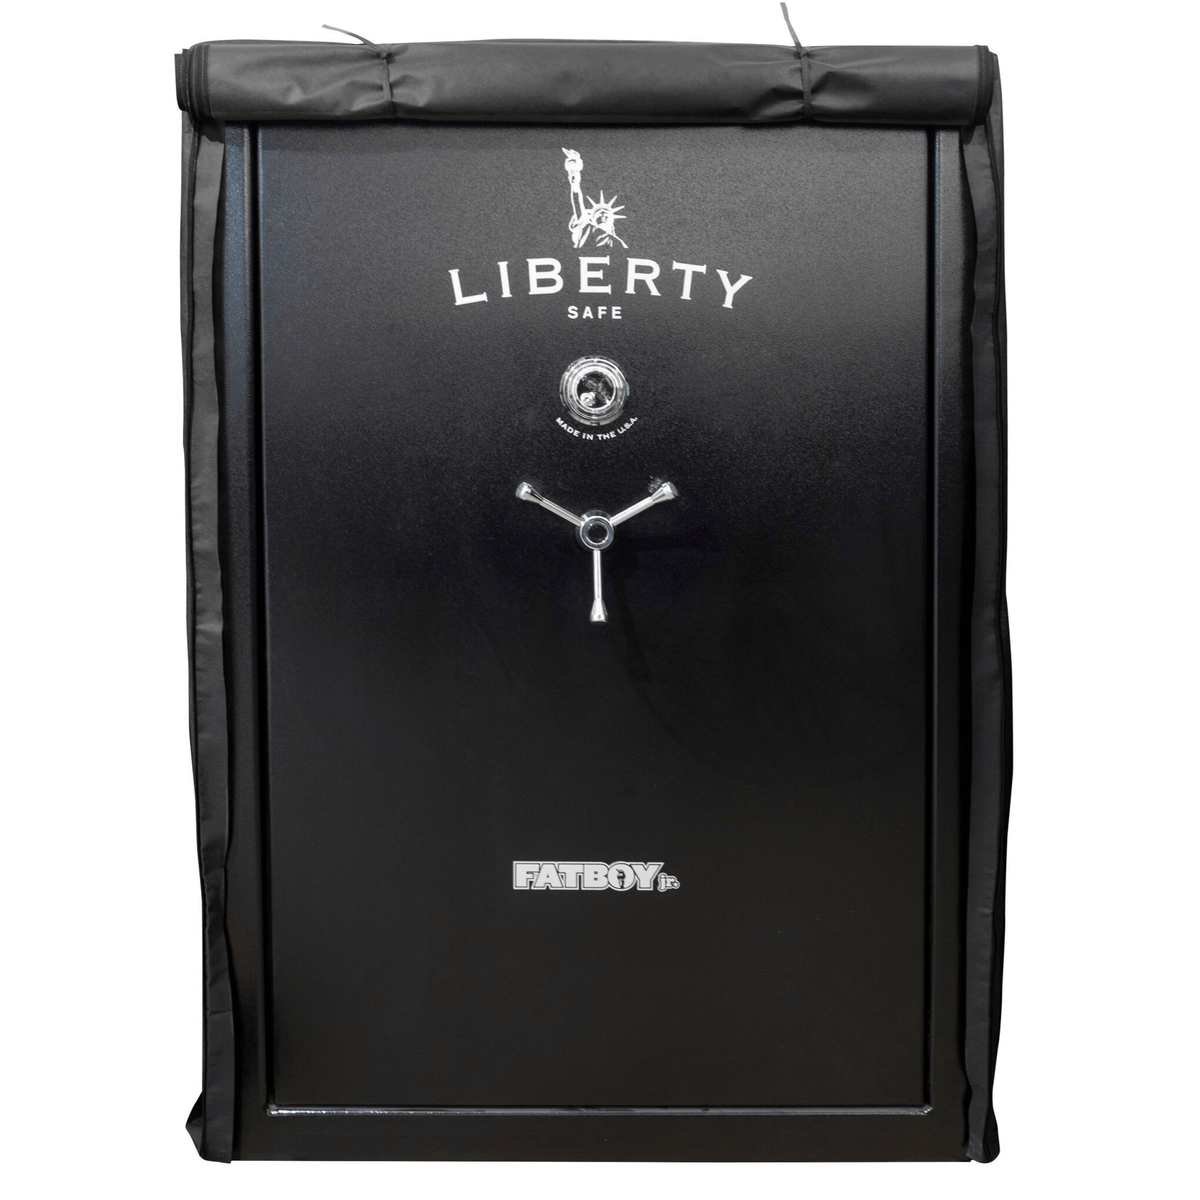 Accessory - Security - Safe Cover - 48 size safes | Liberty Safe Norcal.